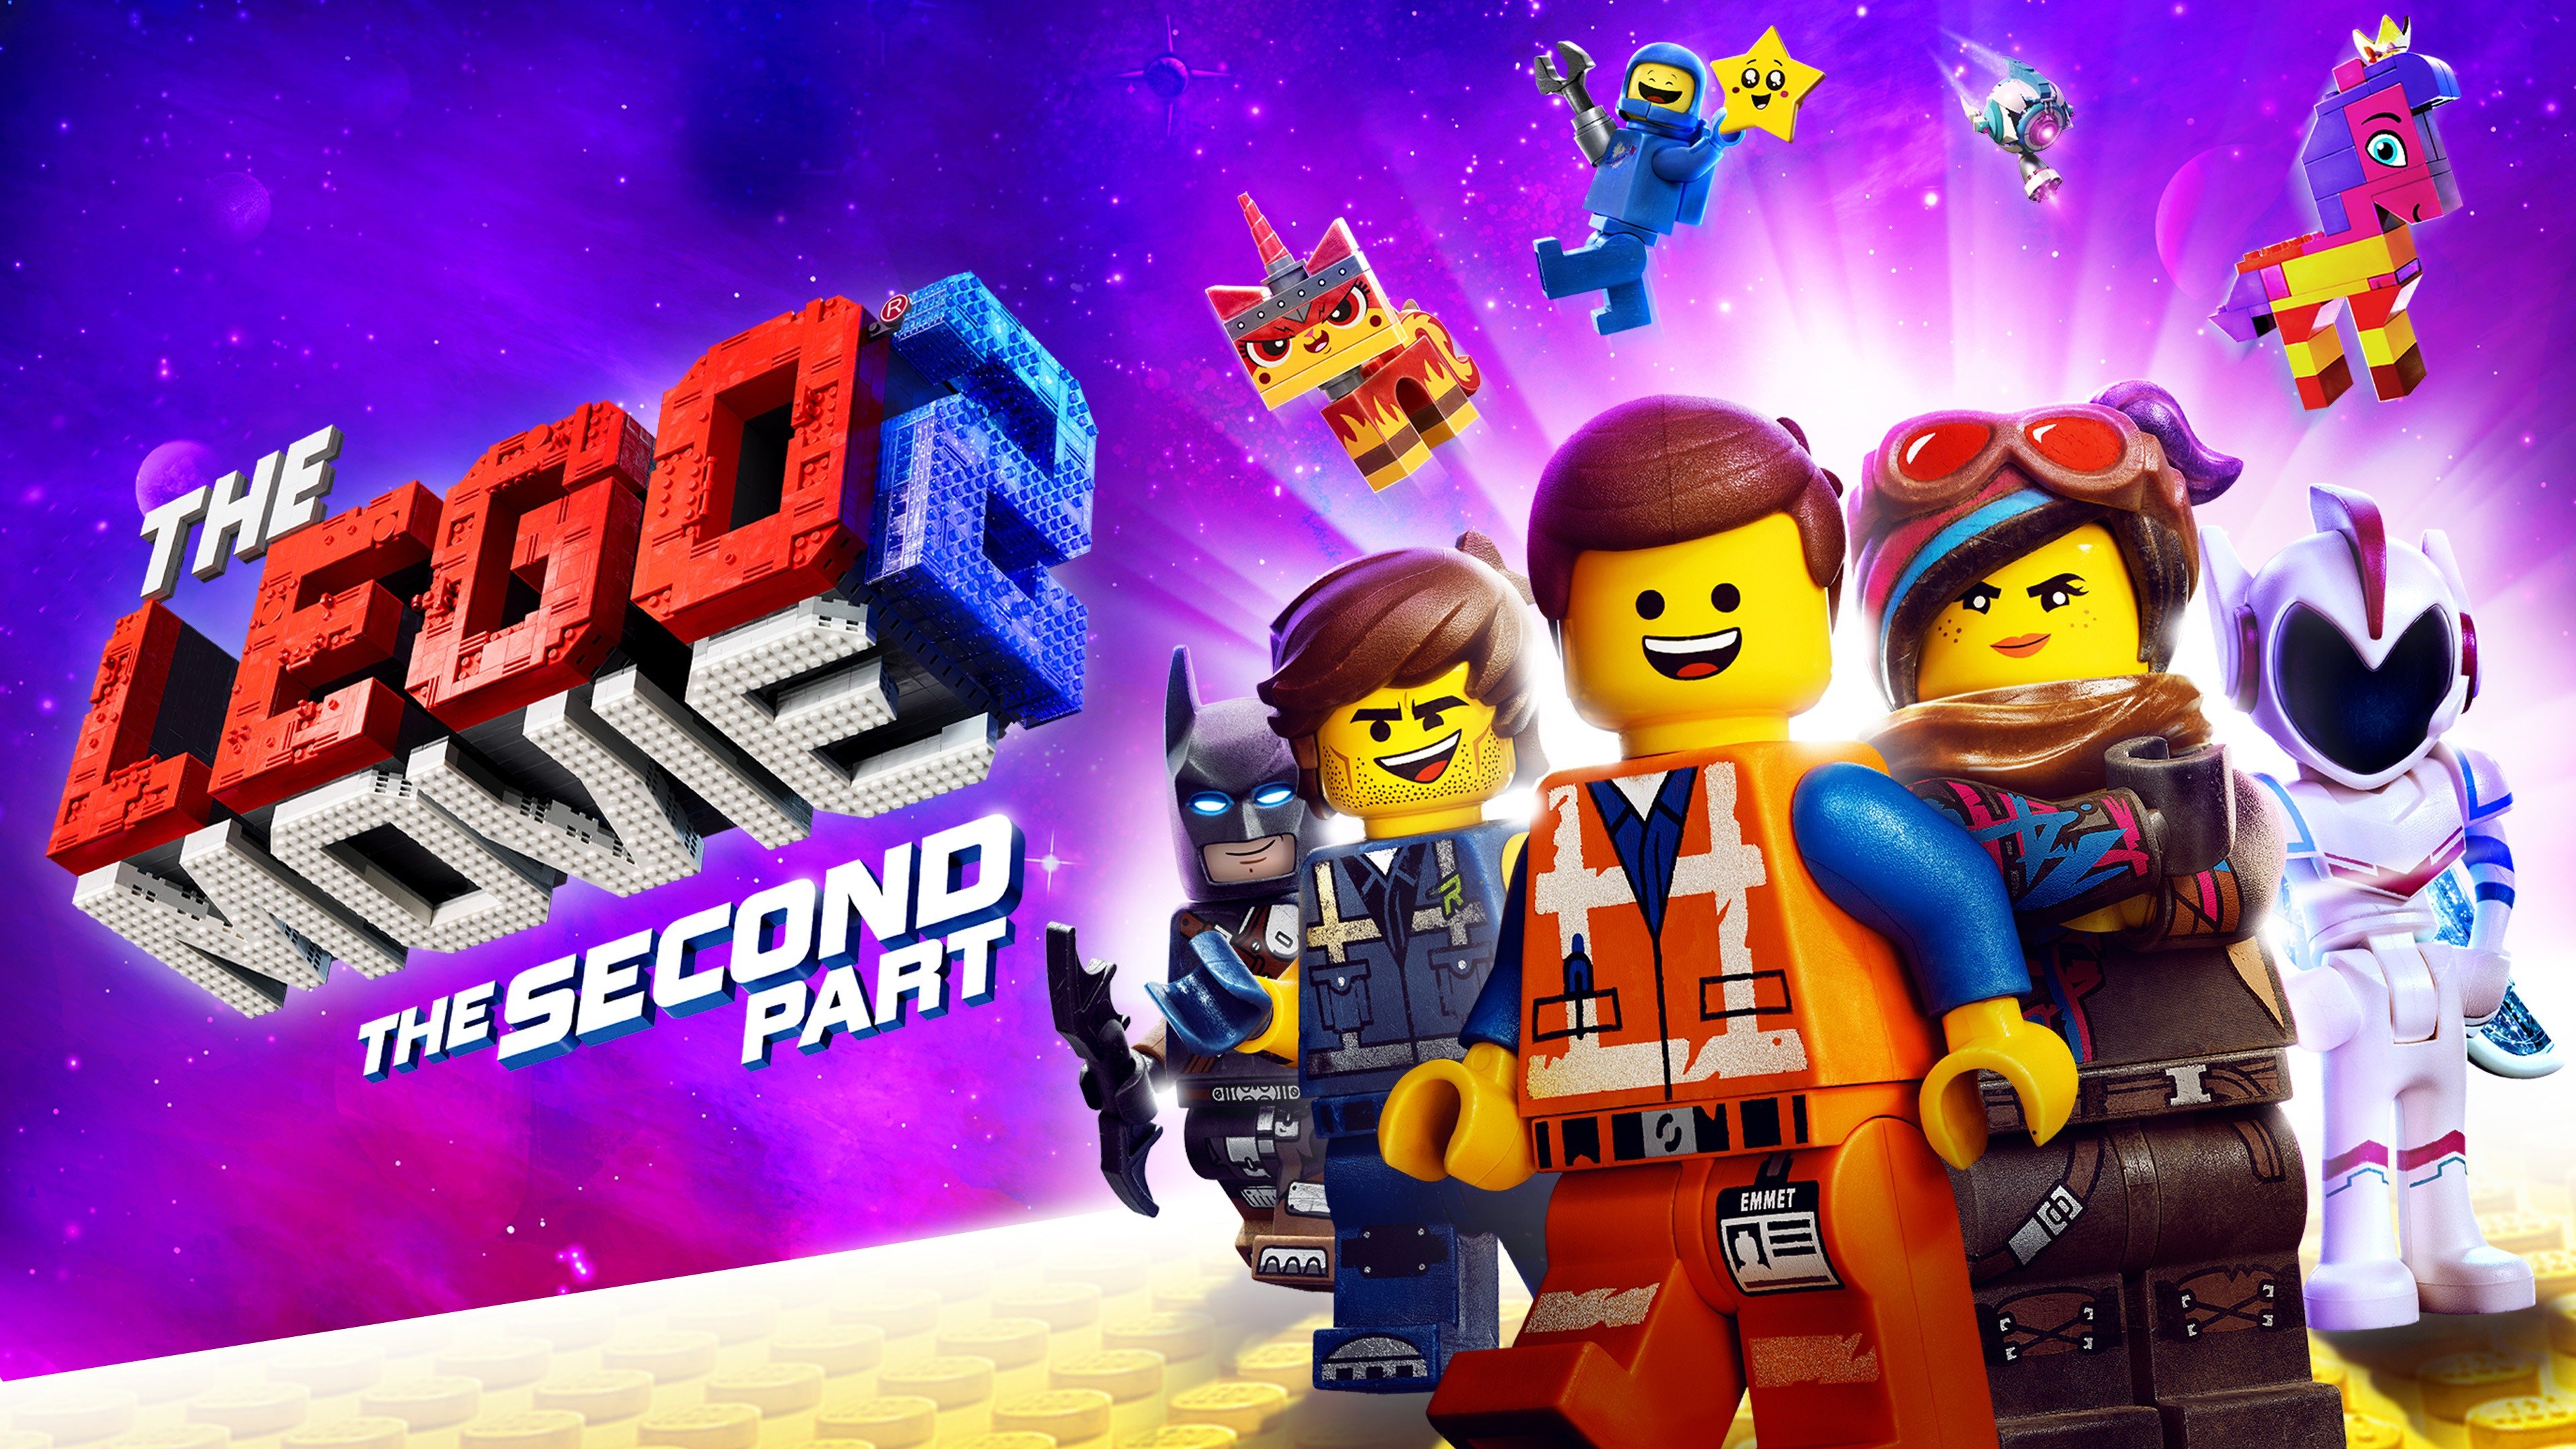 Watch The LEGO Movie 2: The Second Part Online with NEON from $5.99.